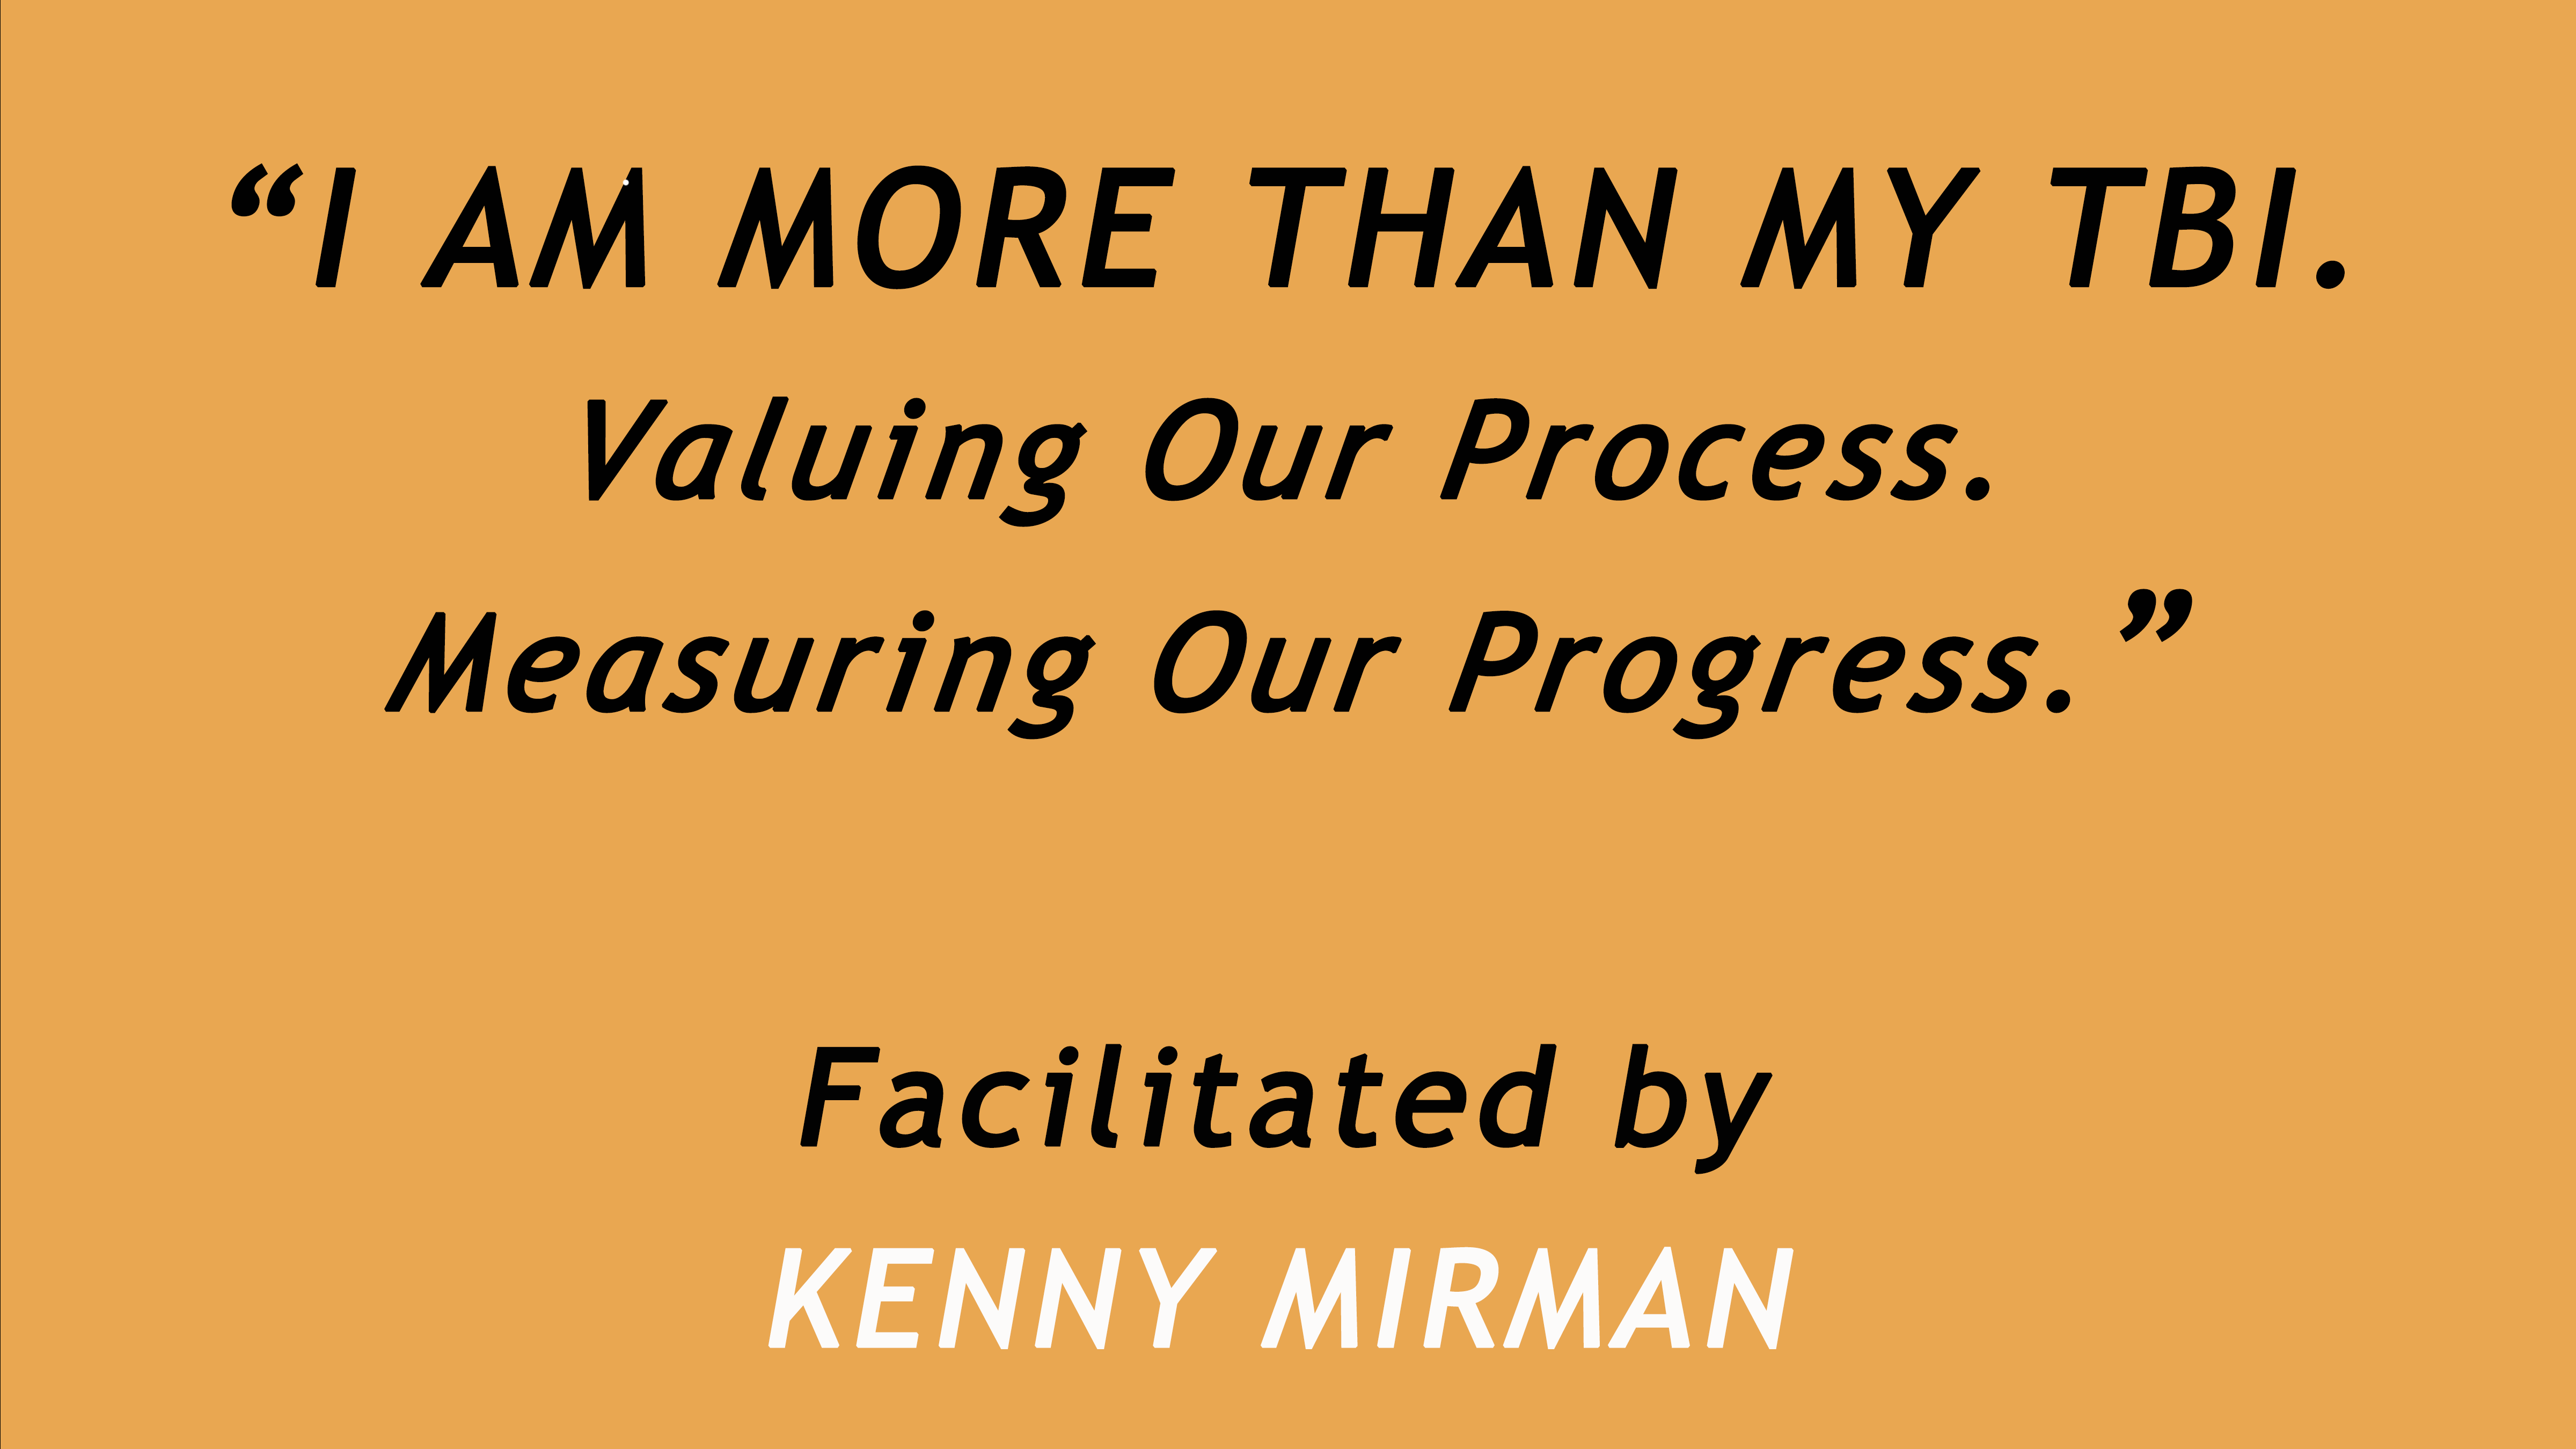 I Am More Than My TBI. Valuing Our Process. Measuring Our Progress. Facilitated by Kenny Mirman